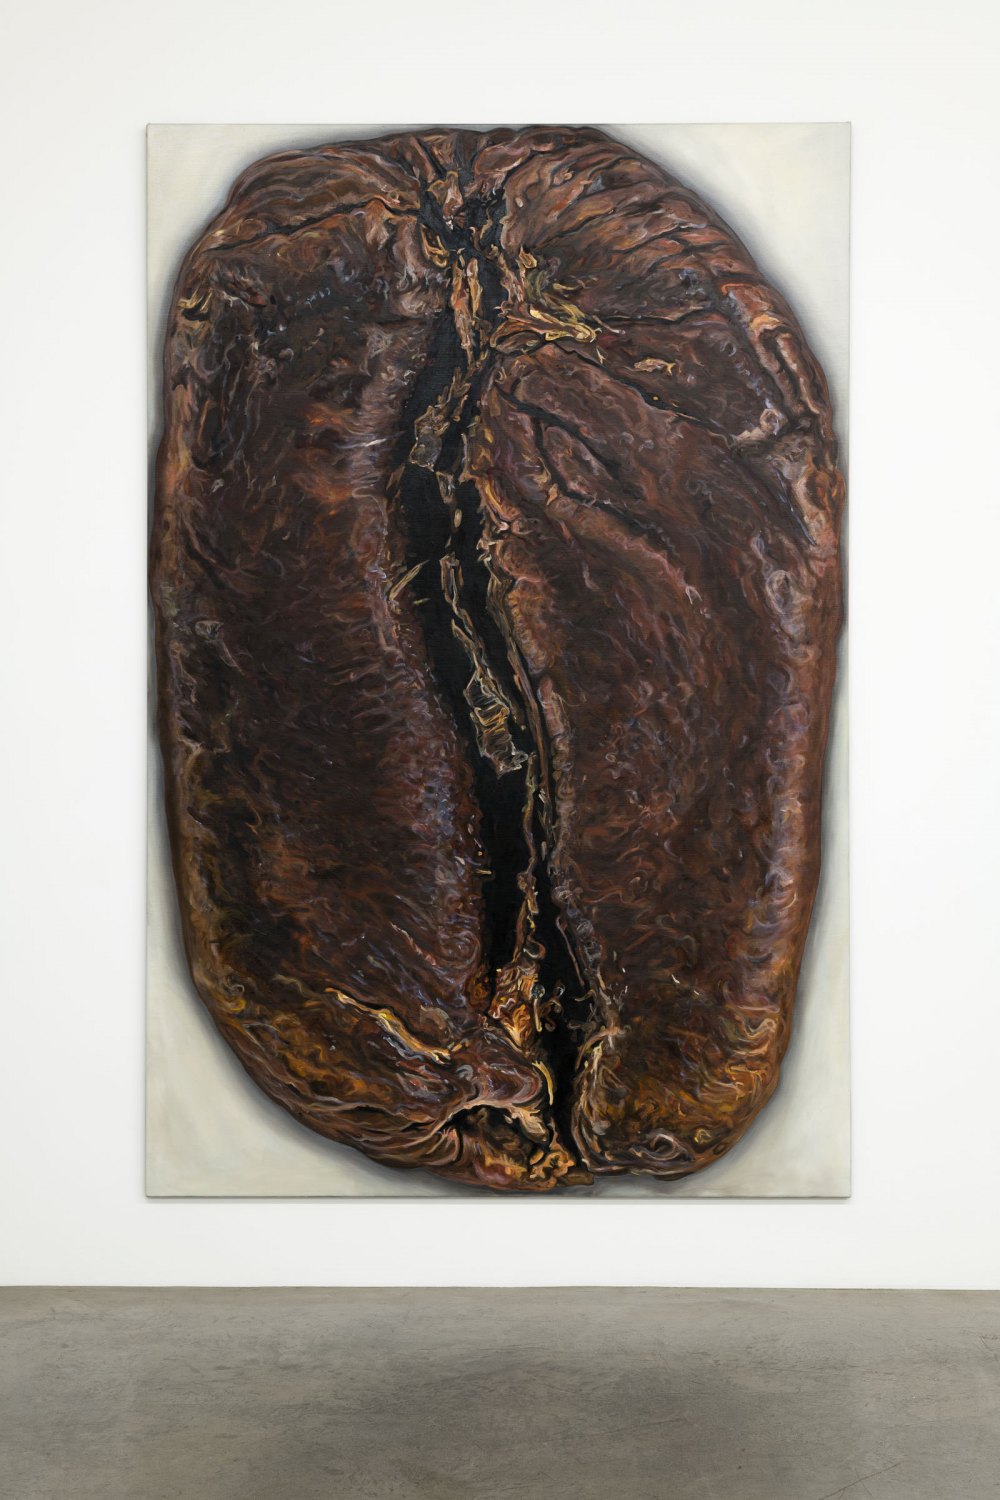 Jana Euler Coffee bean - Where the energy comes from 4, 2023  Oil on canvas  290 x 190 cm  